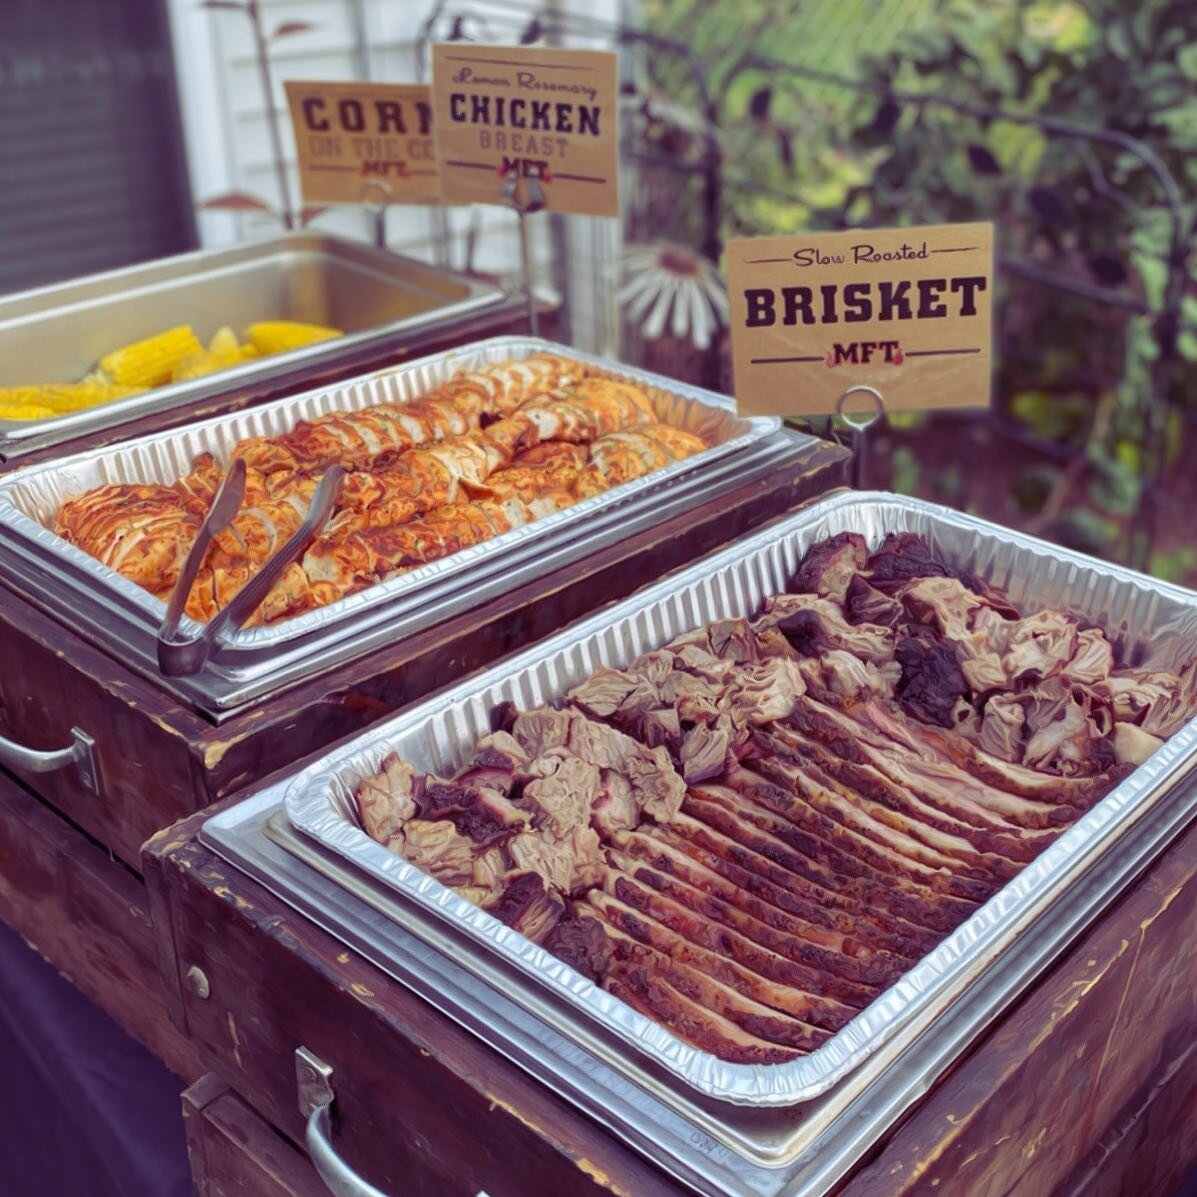 Look at this spread we did for a small #backyardparty 🤤 . Brisket, BBQ chicken and corn on the cob. Want some? Call us!
#boisecatering #idahofoodie #boiseeventplanner #boisestatebroncos